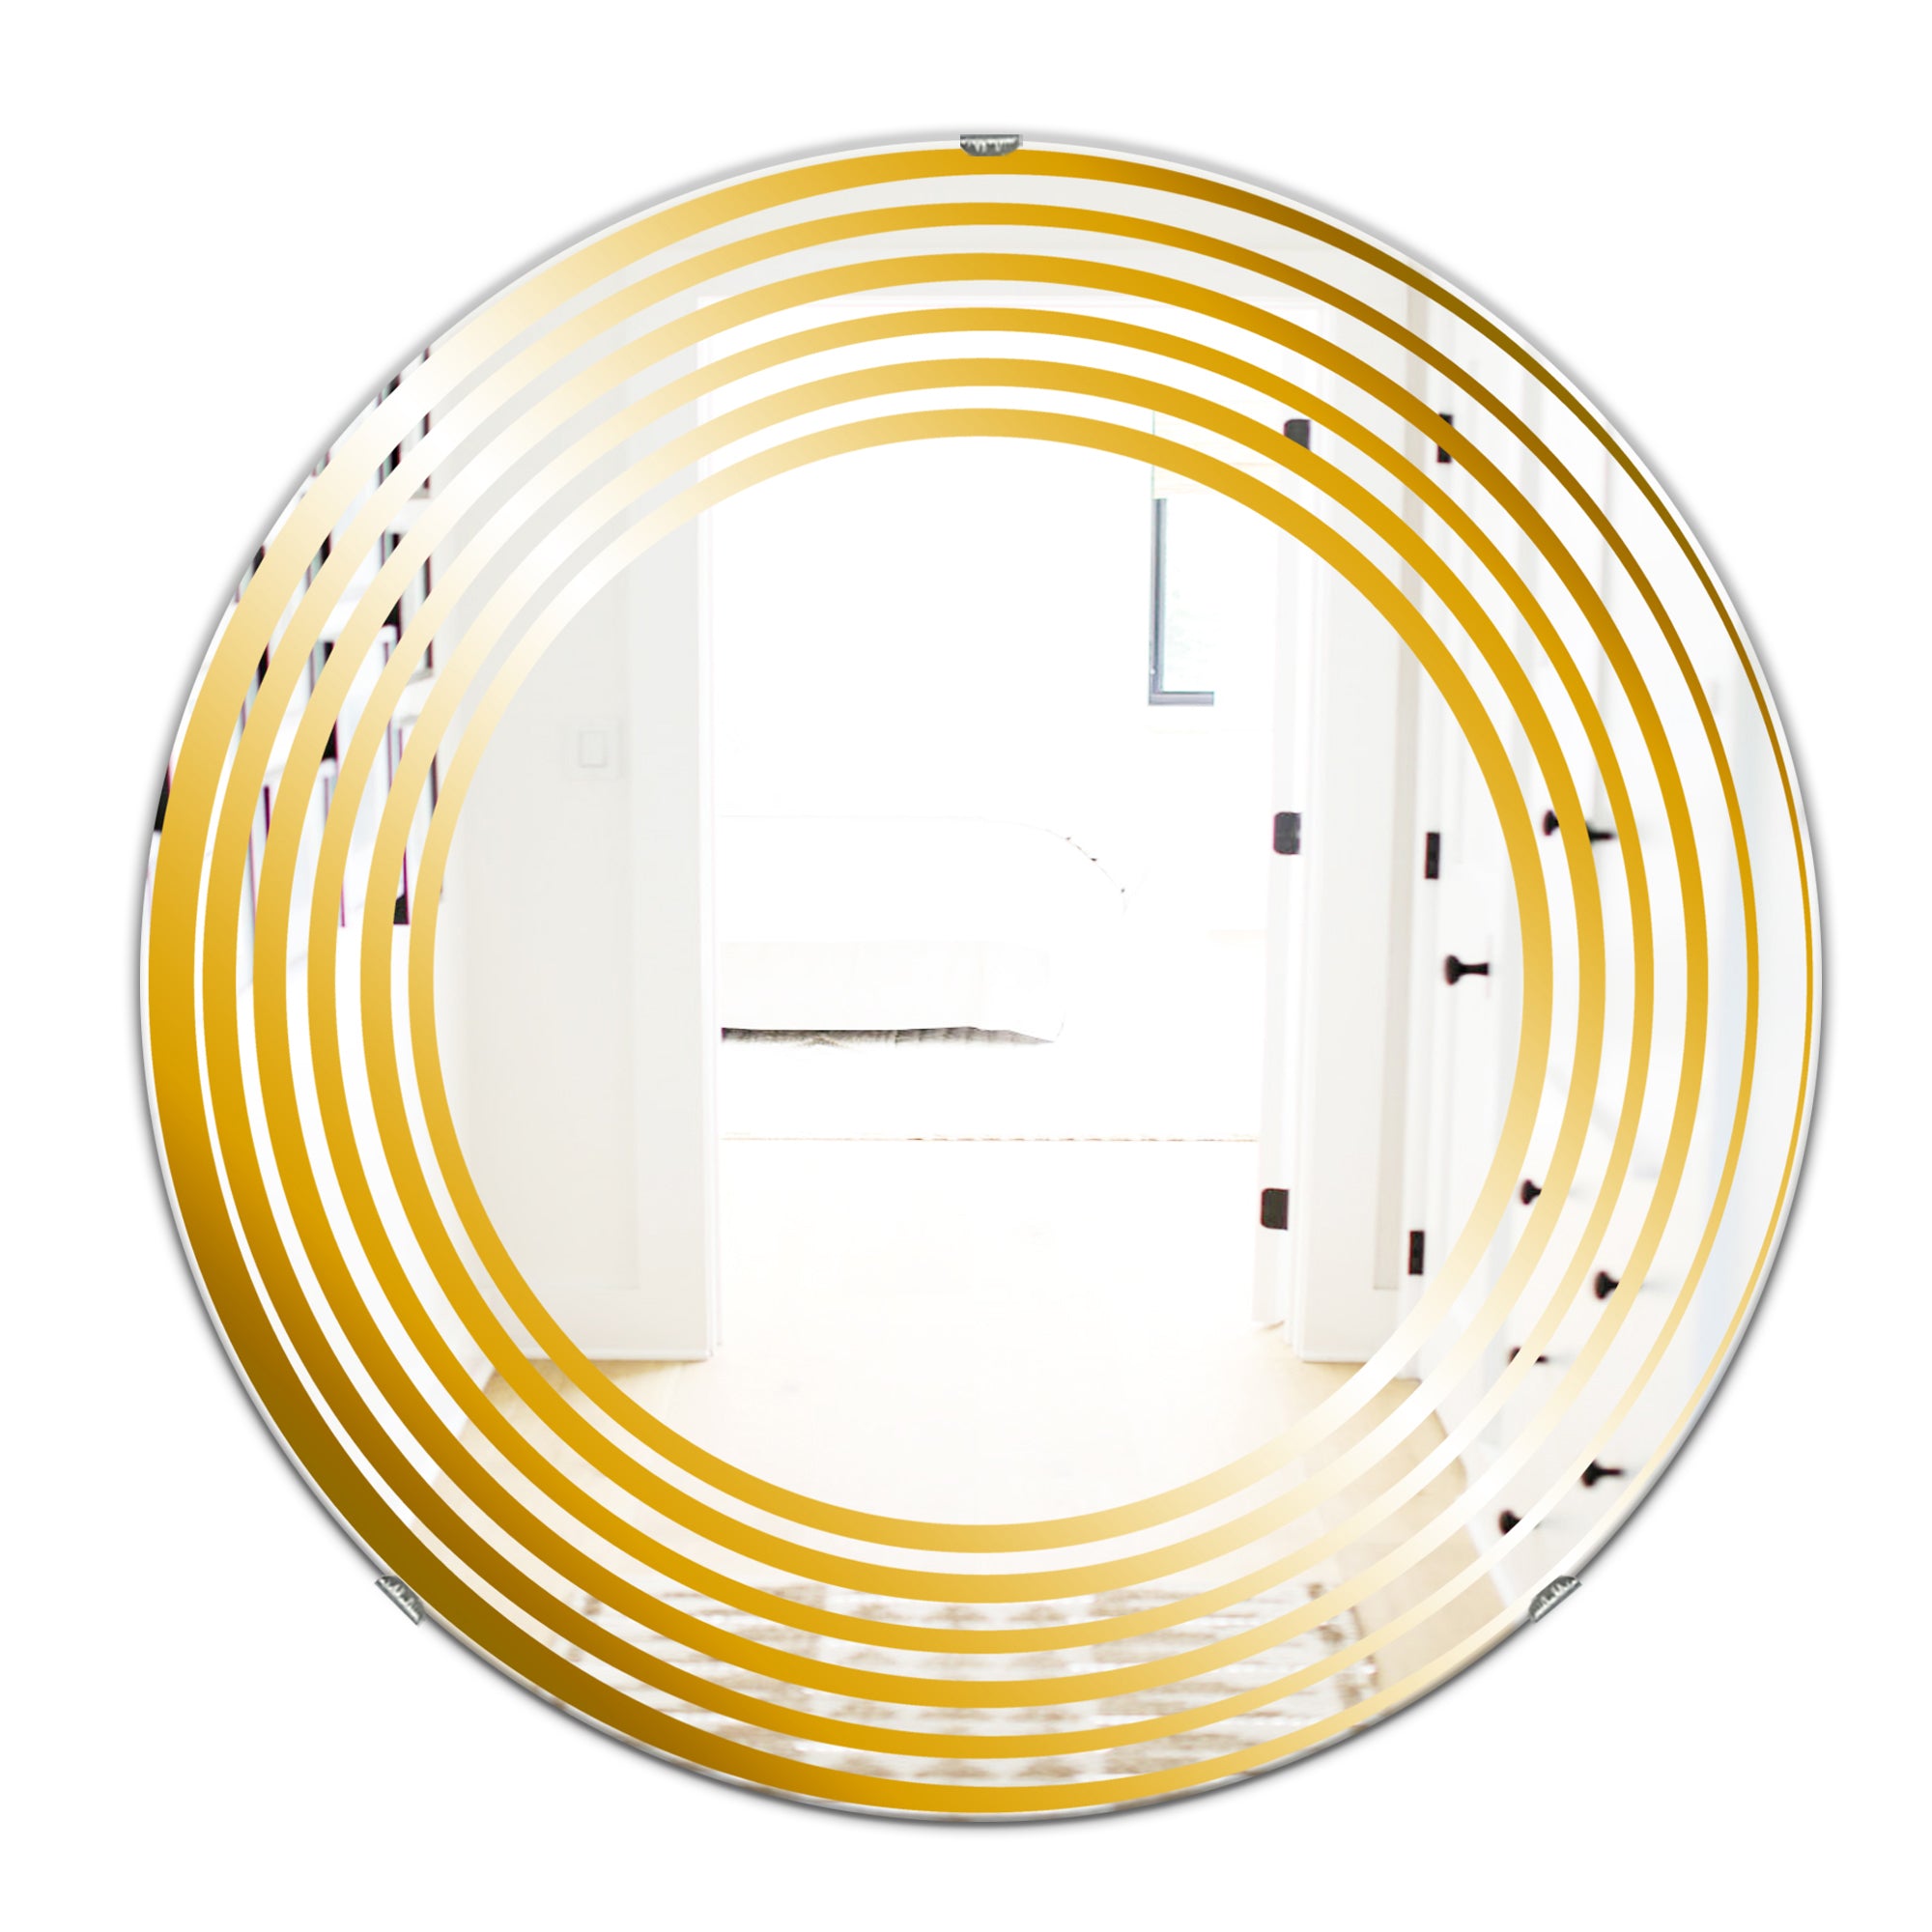 Designart 'Yellow Circles' Glam Mirror - Oval or Round Accent or Vanity Mirror